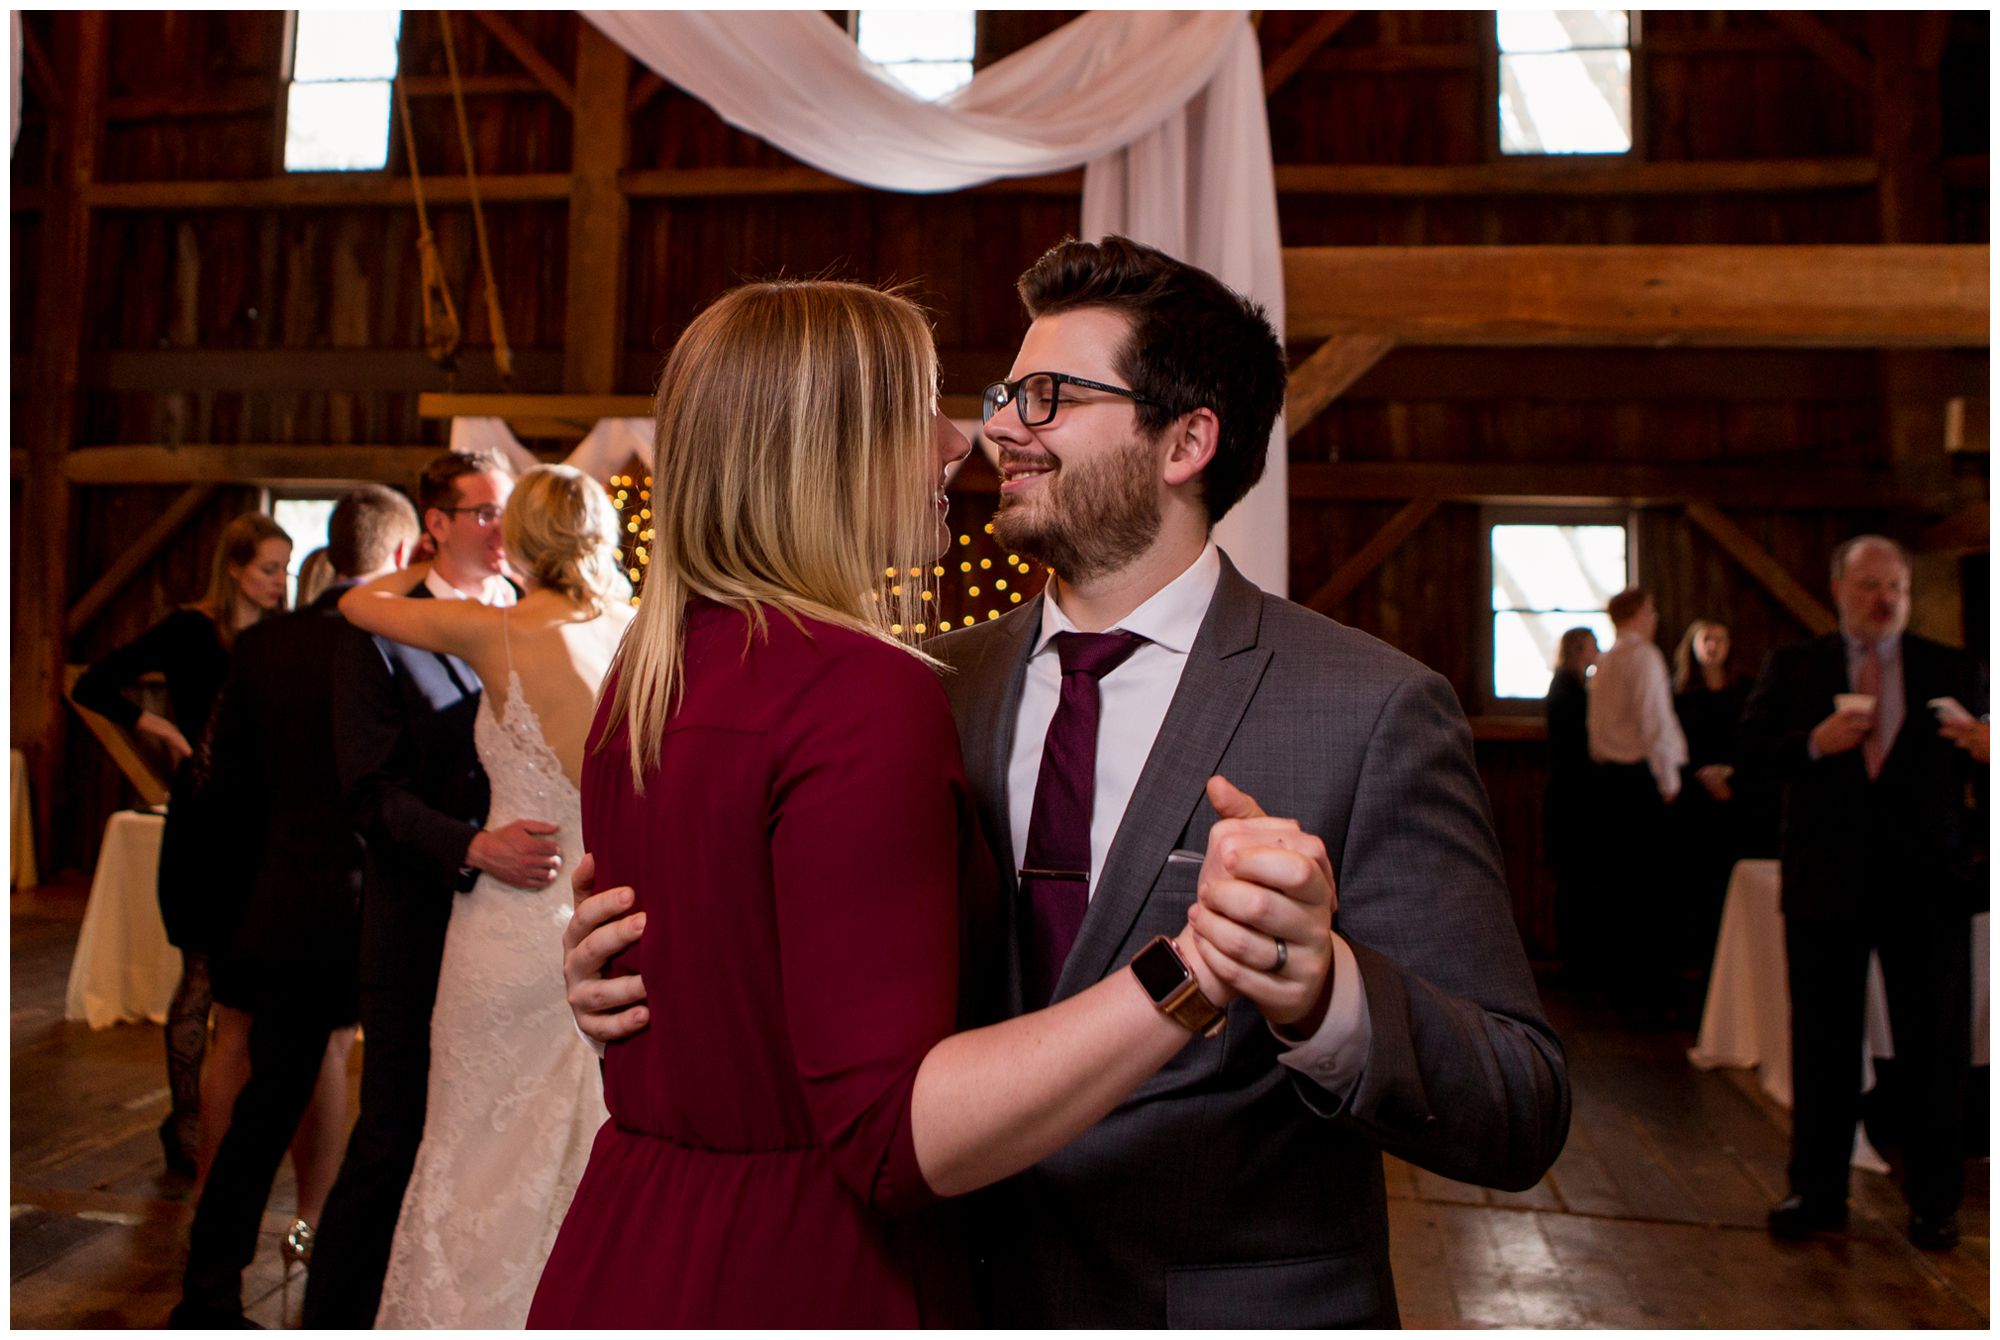 guests dance during wedding reception at Mustard Seed Gardens in Noblesville Indiana